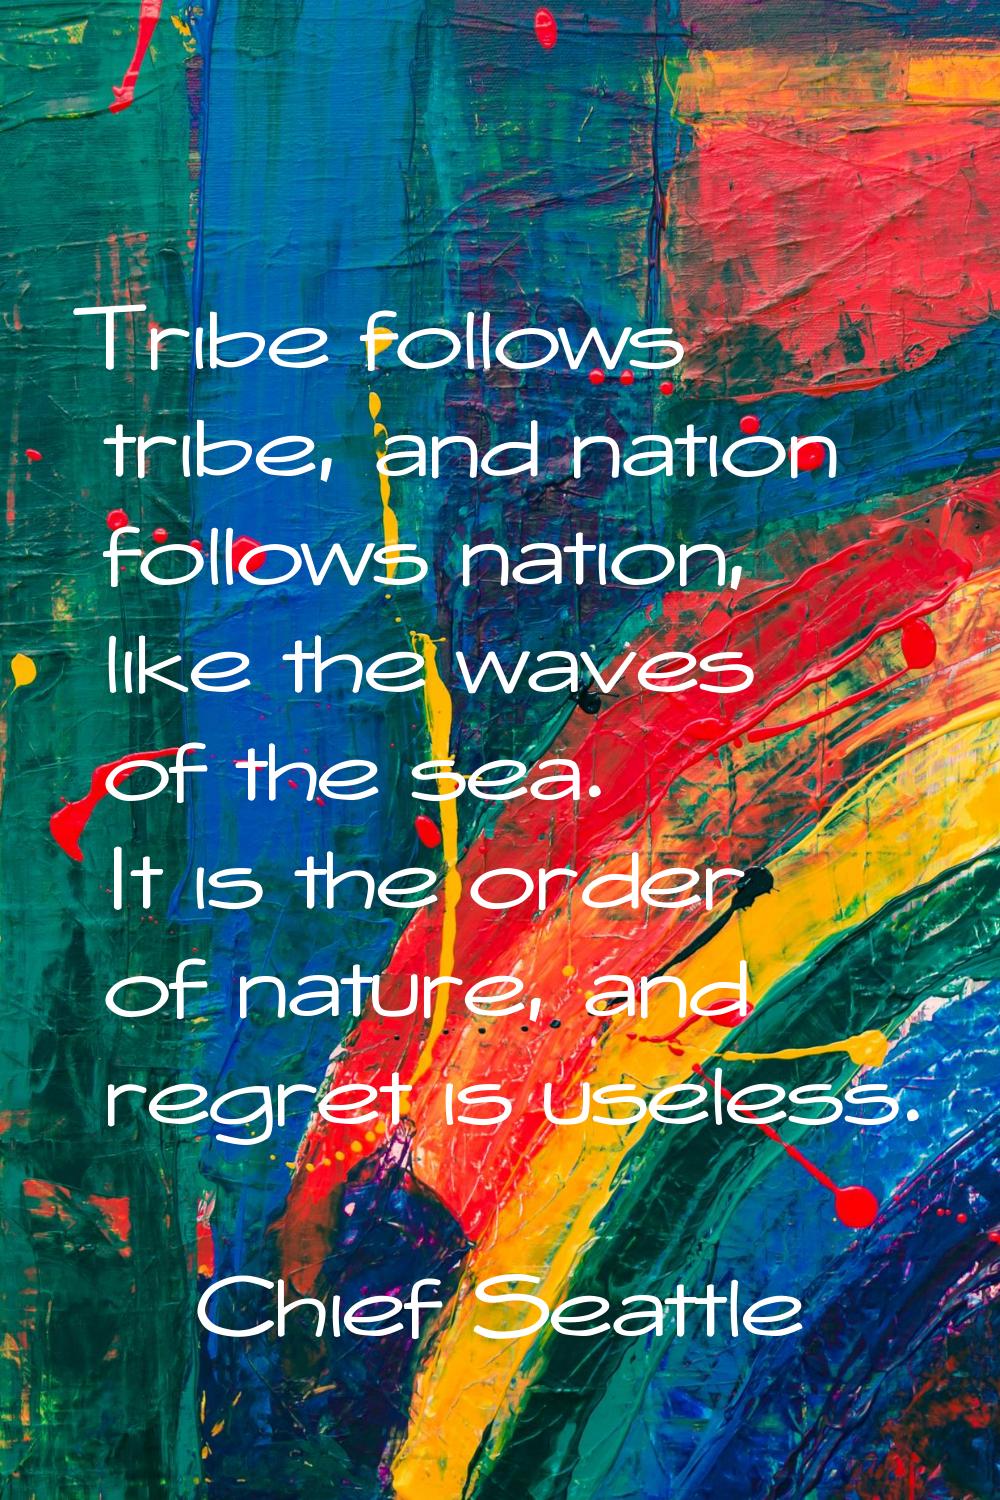 Tribe follows tribe, and nation follows nation, like the waves of the sea. It is the order of natur